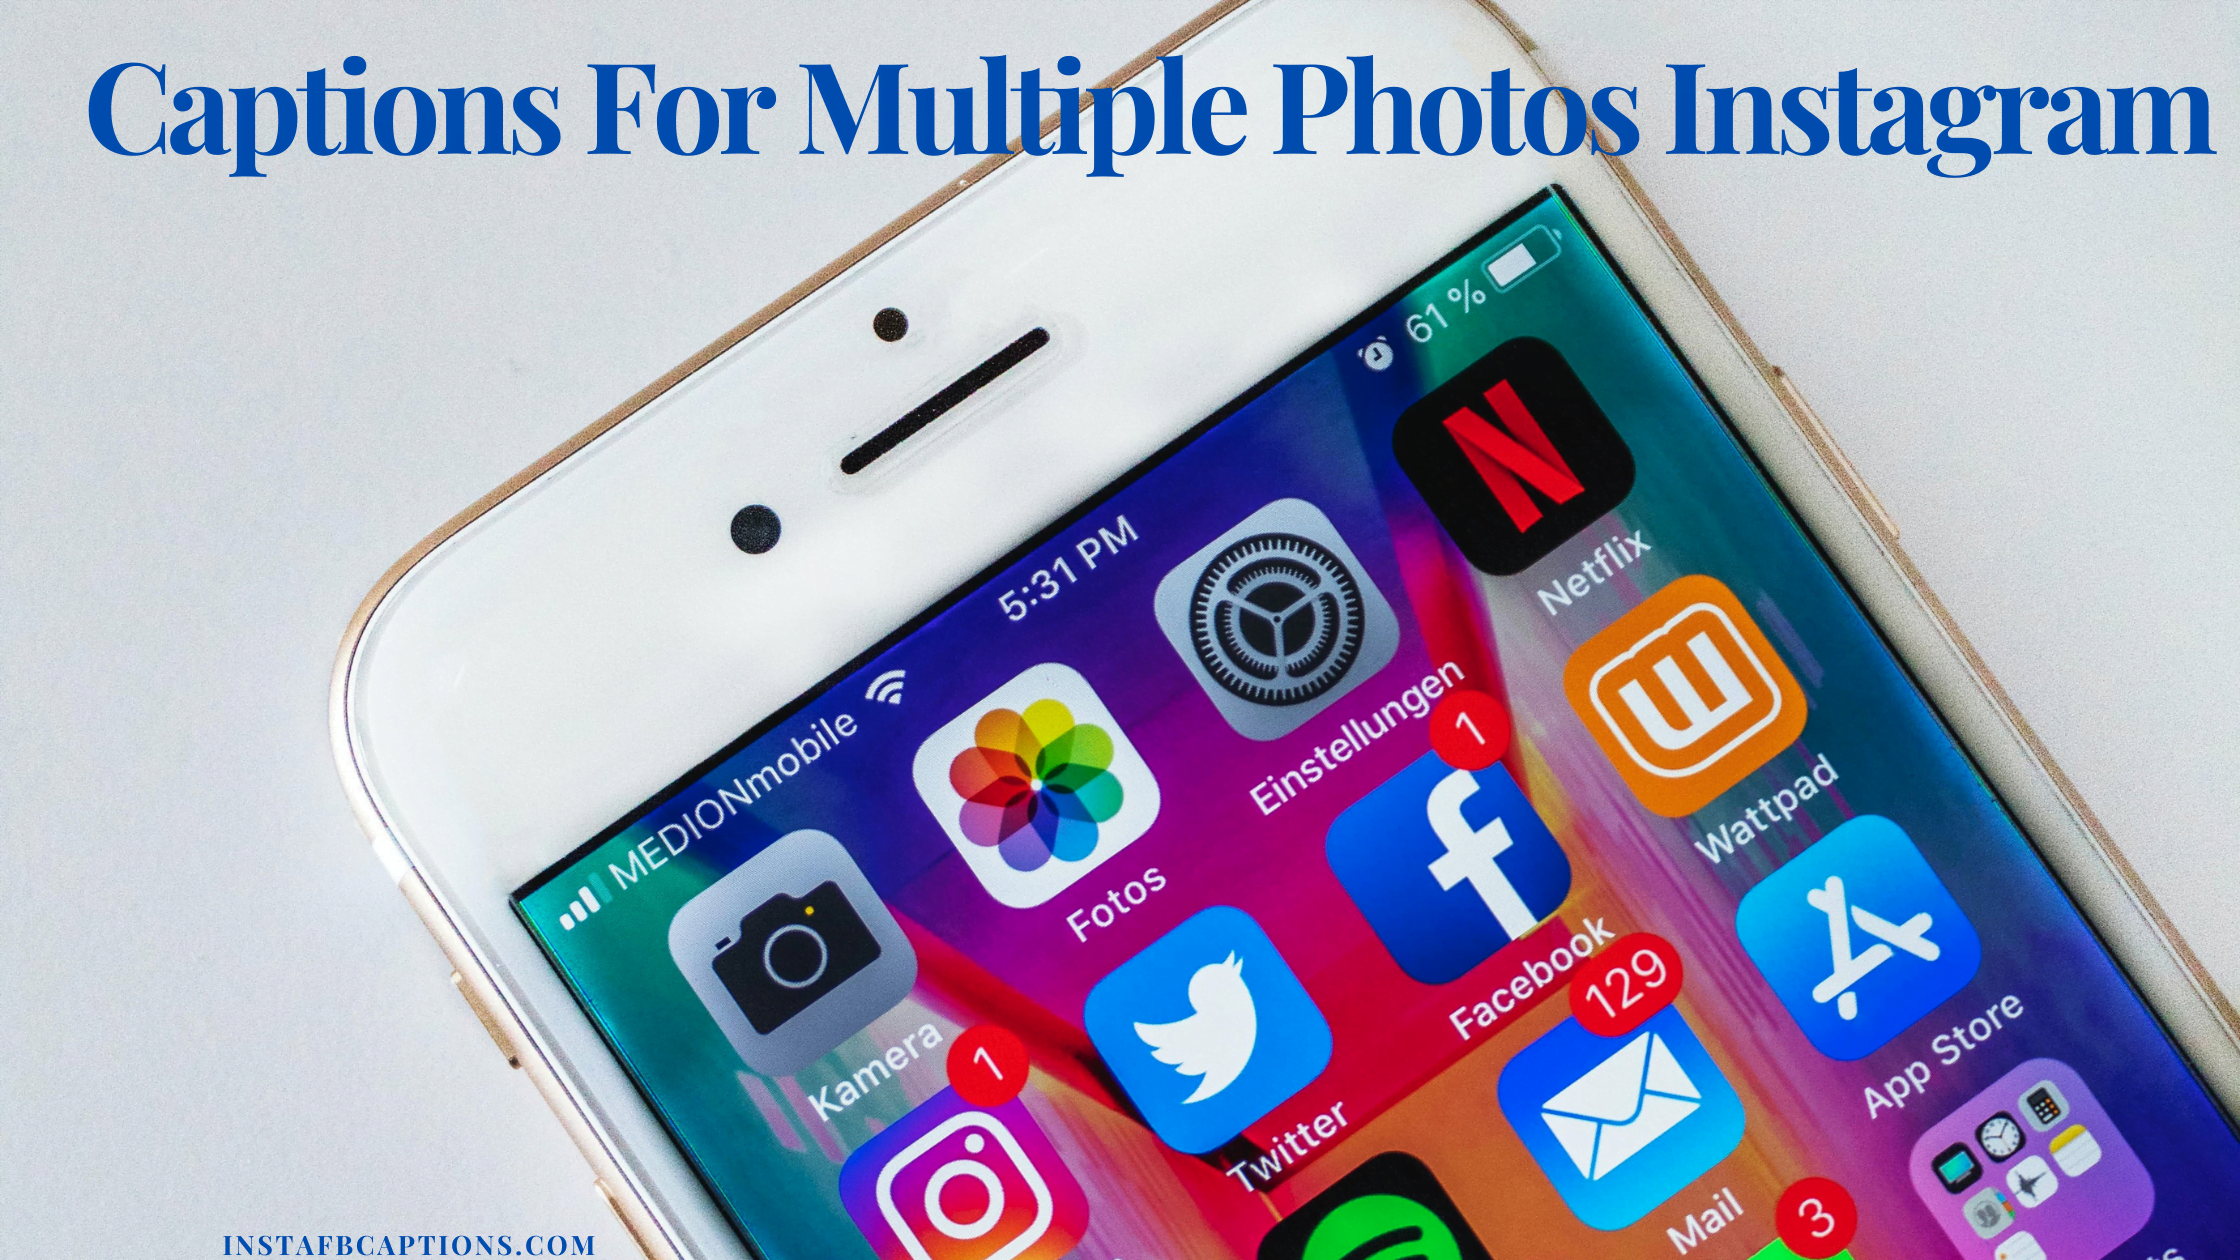 Captions For Multiple Photos Instagram  - Captions For Multiple Photos Instagram 1 - [New] Different Captions for Multiple Photos on Instagram 2023